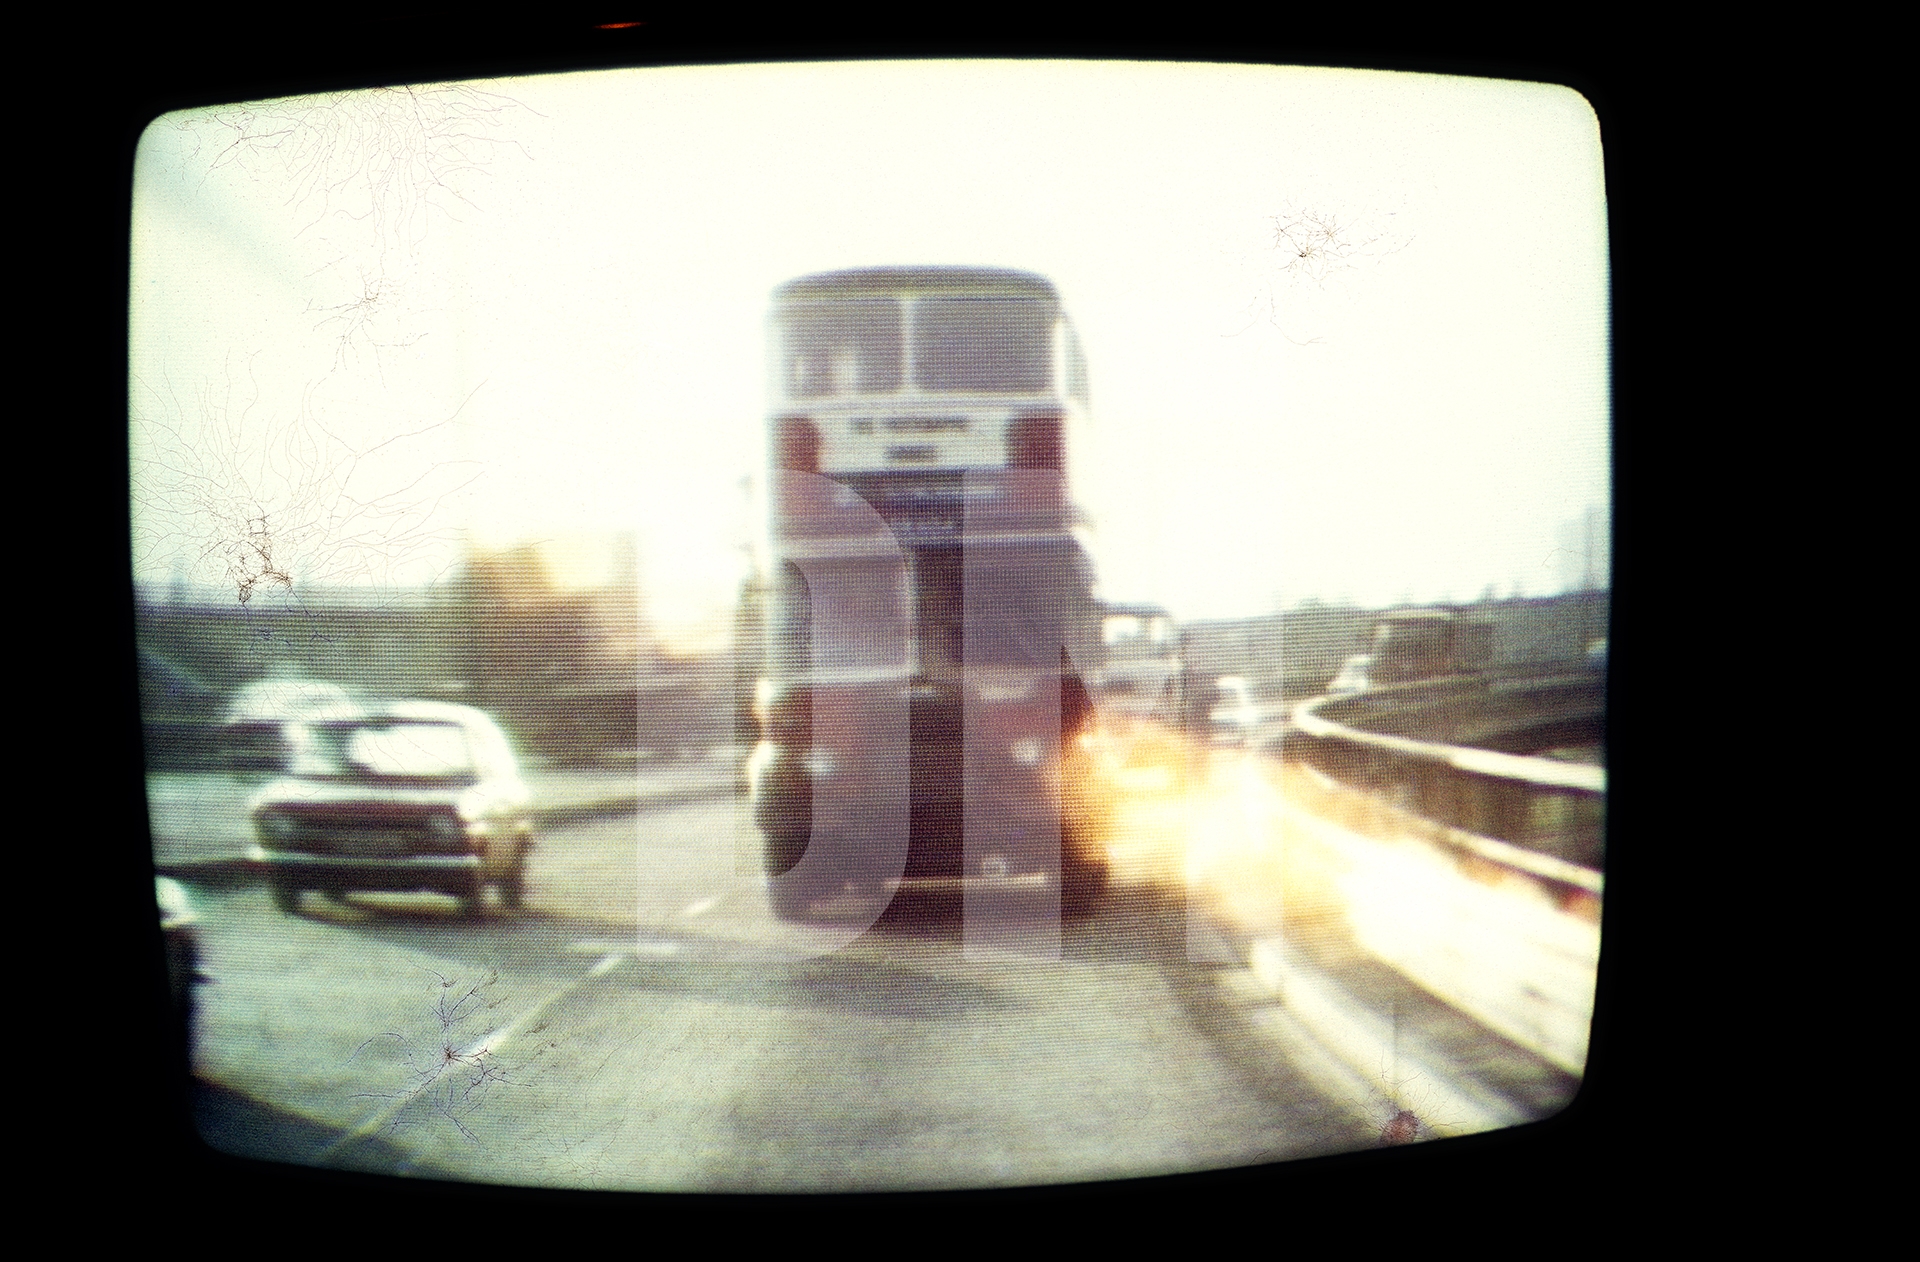 Free Photographic Omnibus as seen on TV, Granada Reports, driving along the Mancunian Way, Manchester. 7 February 1974 by Daniel Meadows